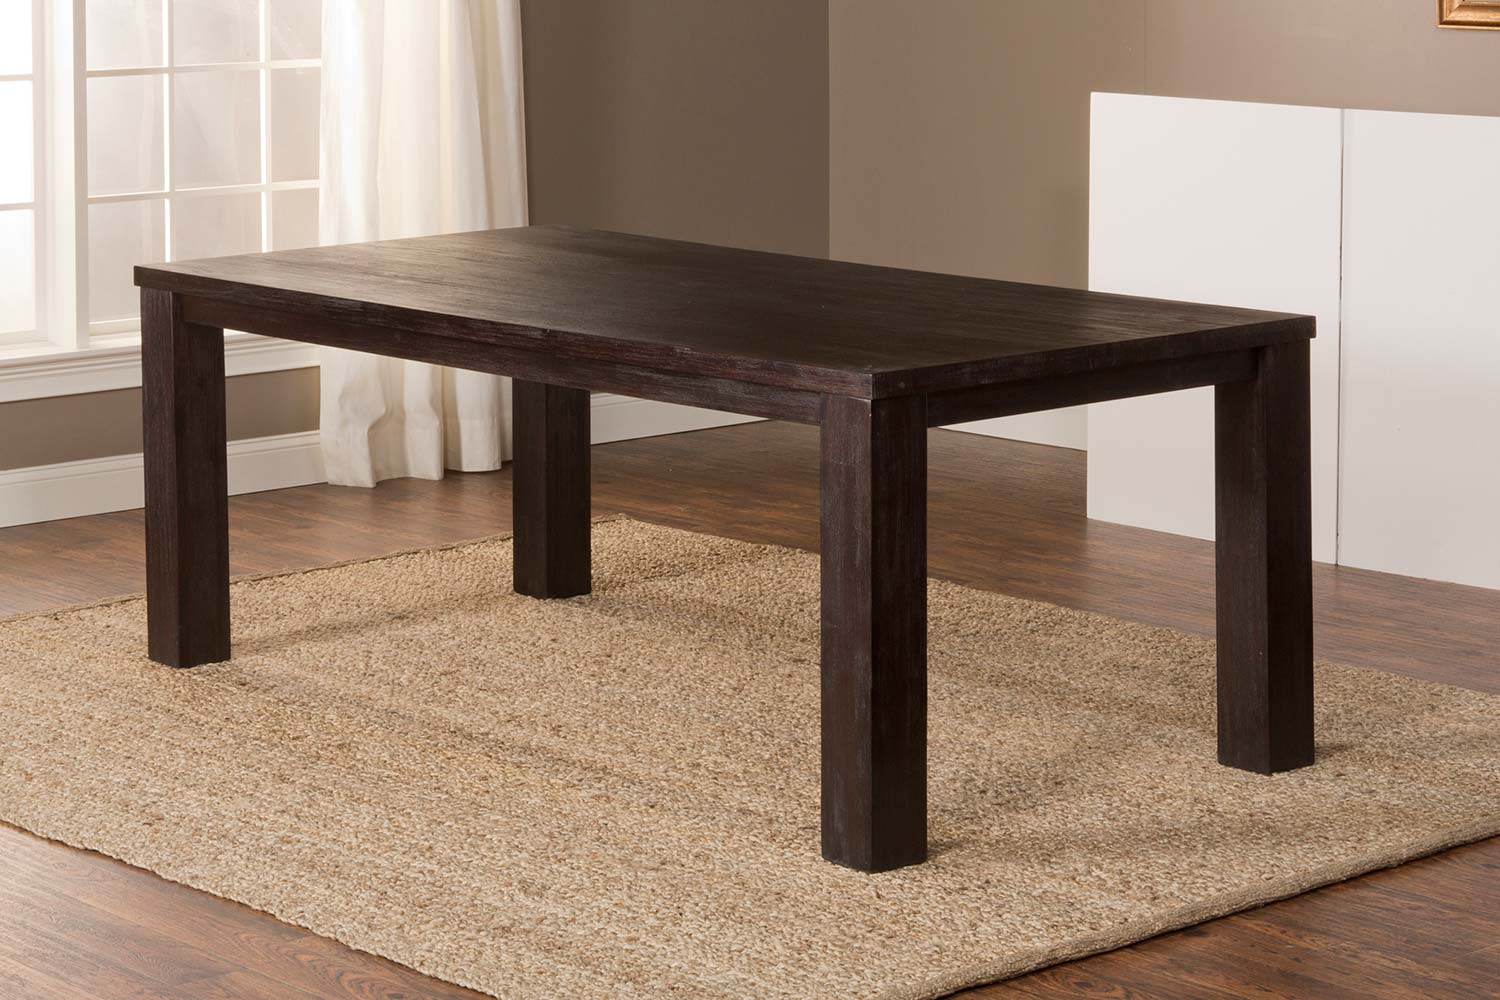 Hillsdale Simply Sydney Dining Table - Smoke Brown